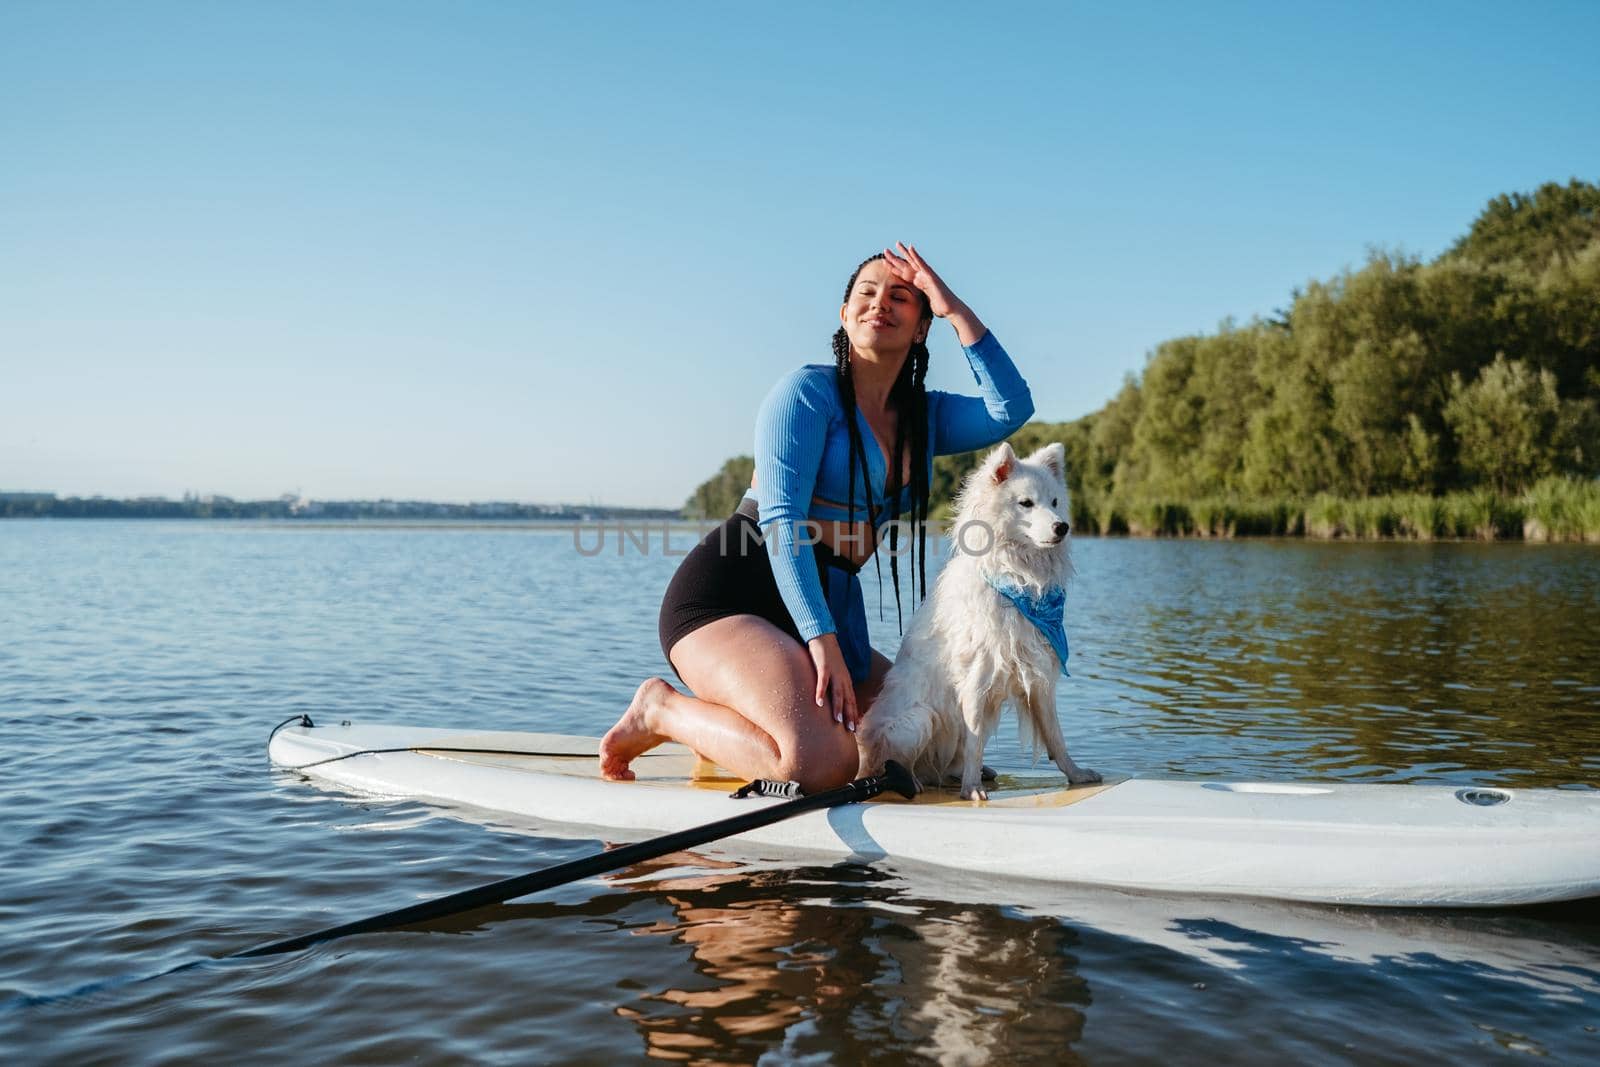 Happy Young Woman Enjoying Life on the Lake at Early Morning Sitting on Sup Board with Her Dog Japanese Spitz